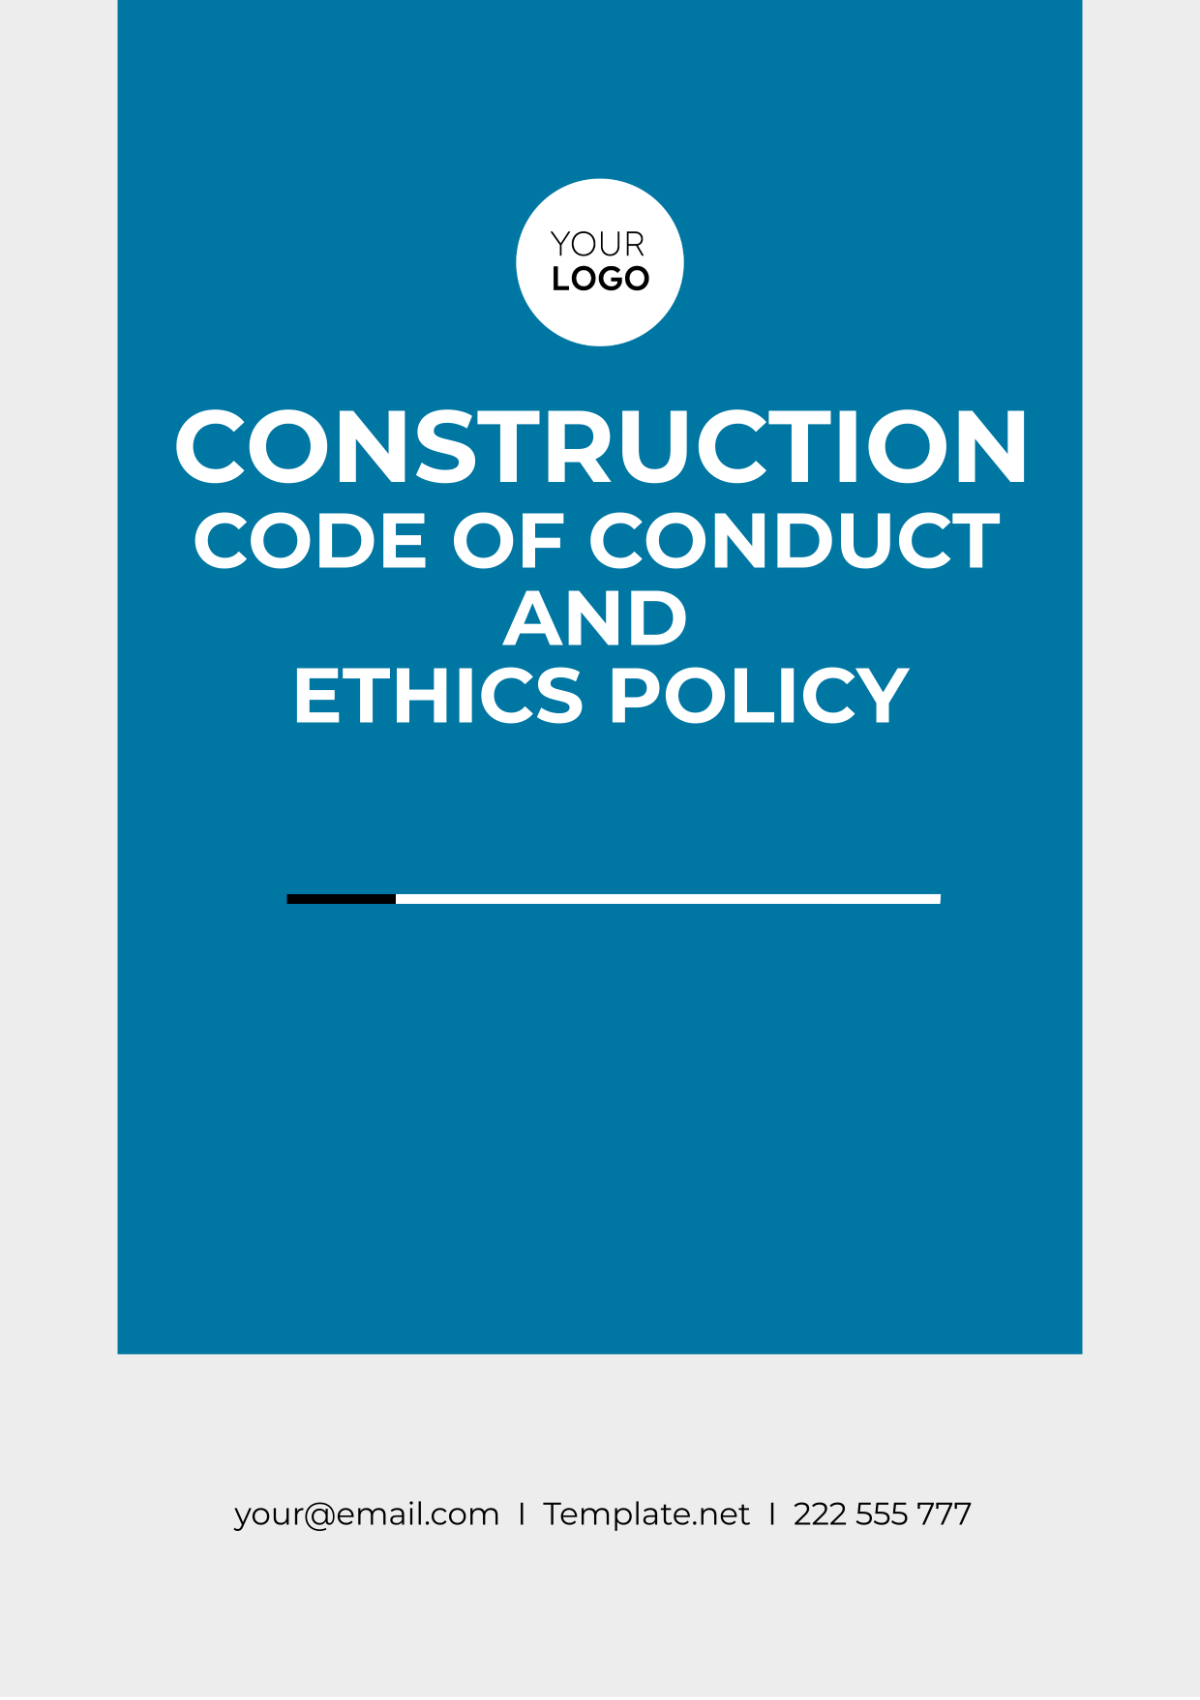 Construction Code of Conduct and Ethics Policy Template